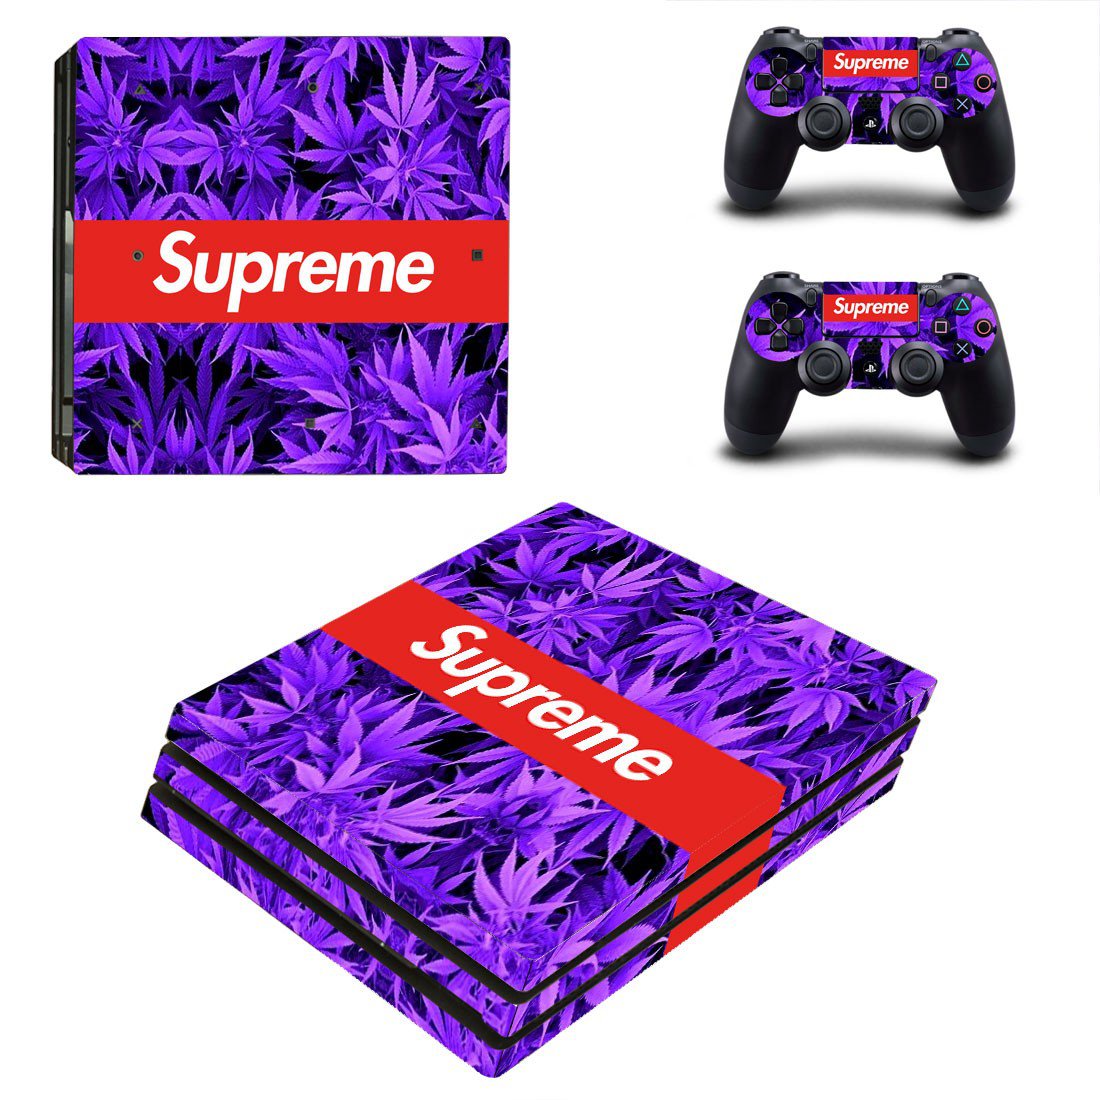 Supreme decal skin sticker for PS4 Pro console and controllers